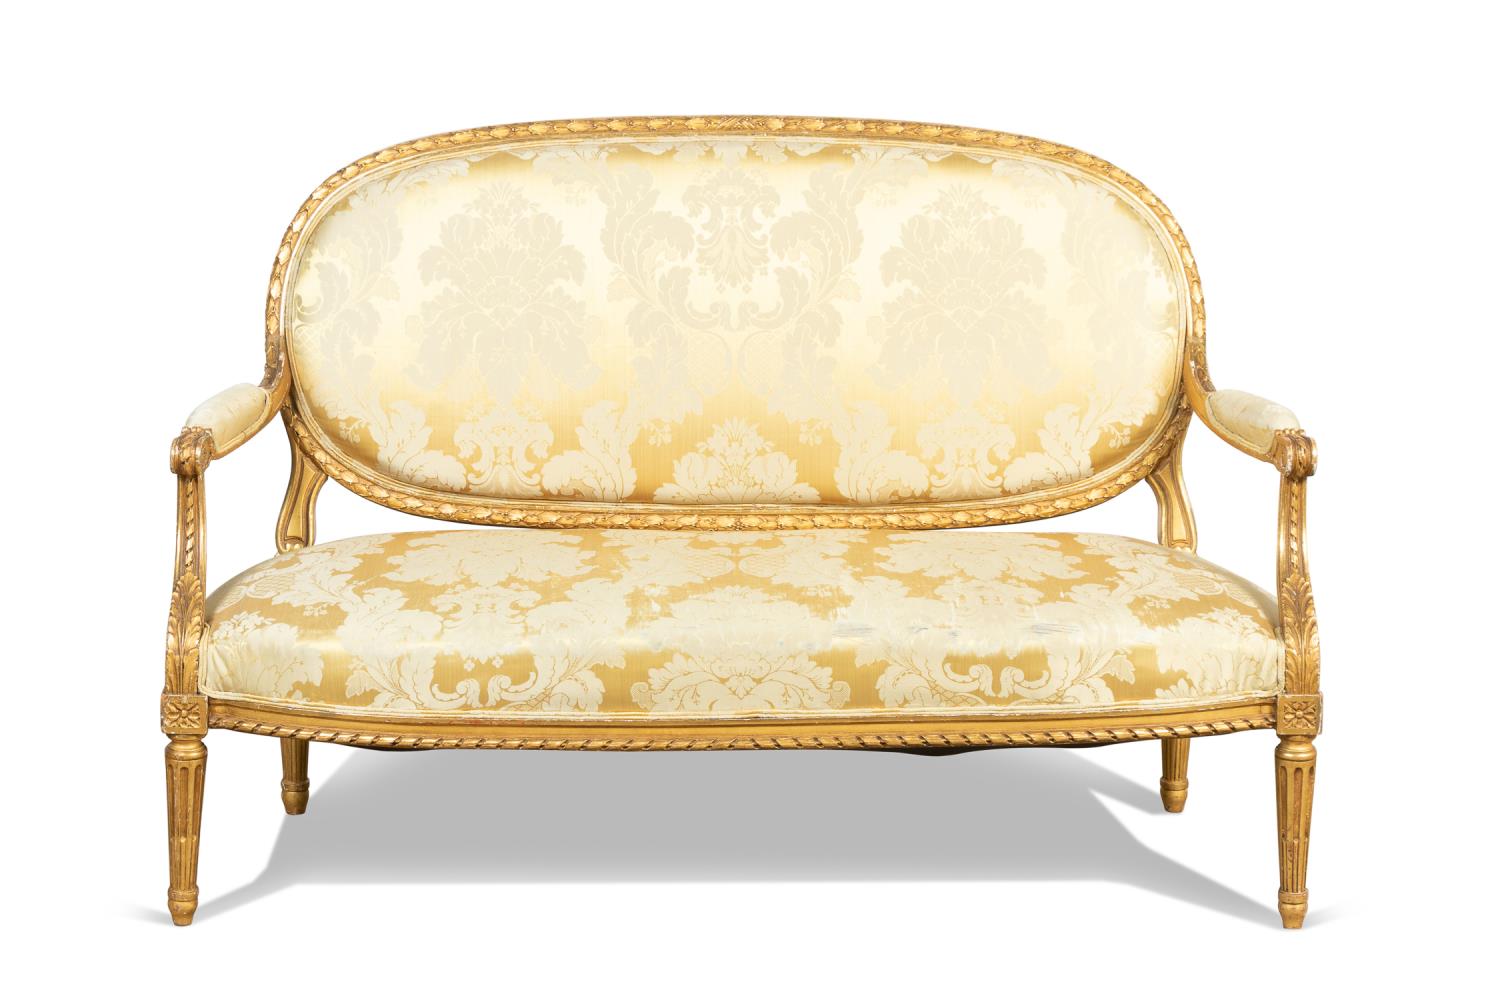 FRENCH LOUIS XVI STYLE SETTEE  358f52